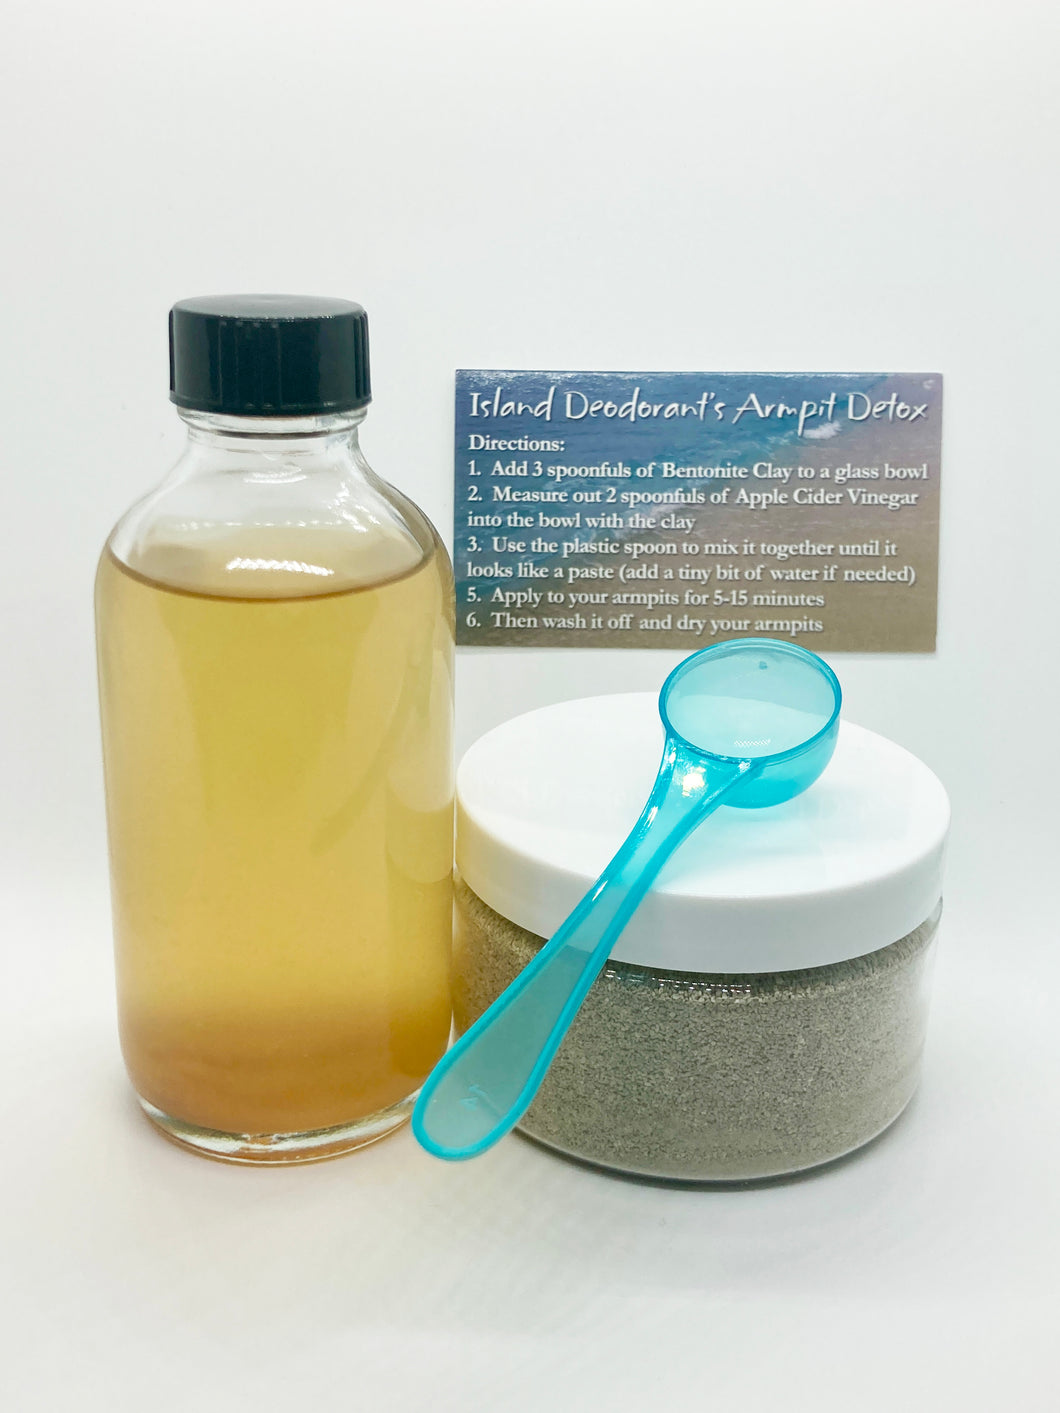 image of armpit detox kit, with 3.6 oz apple cidar vinegar in glass bottle, 6 oz of bentonite clay in a plastic container, measuring spoon, and instruction card